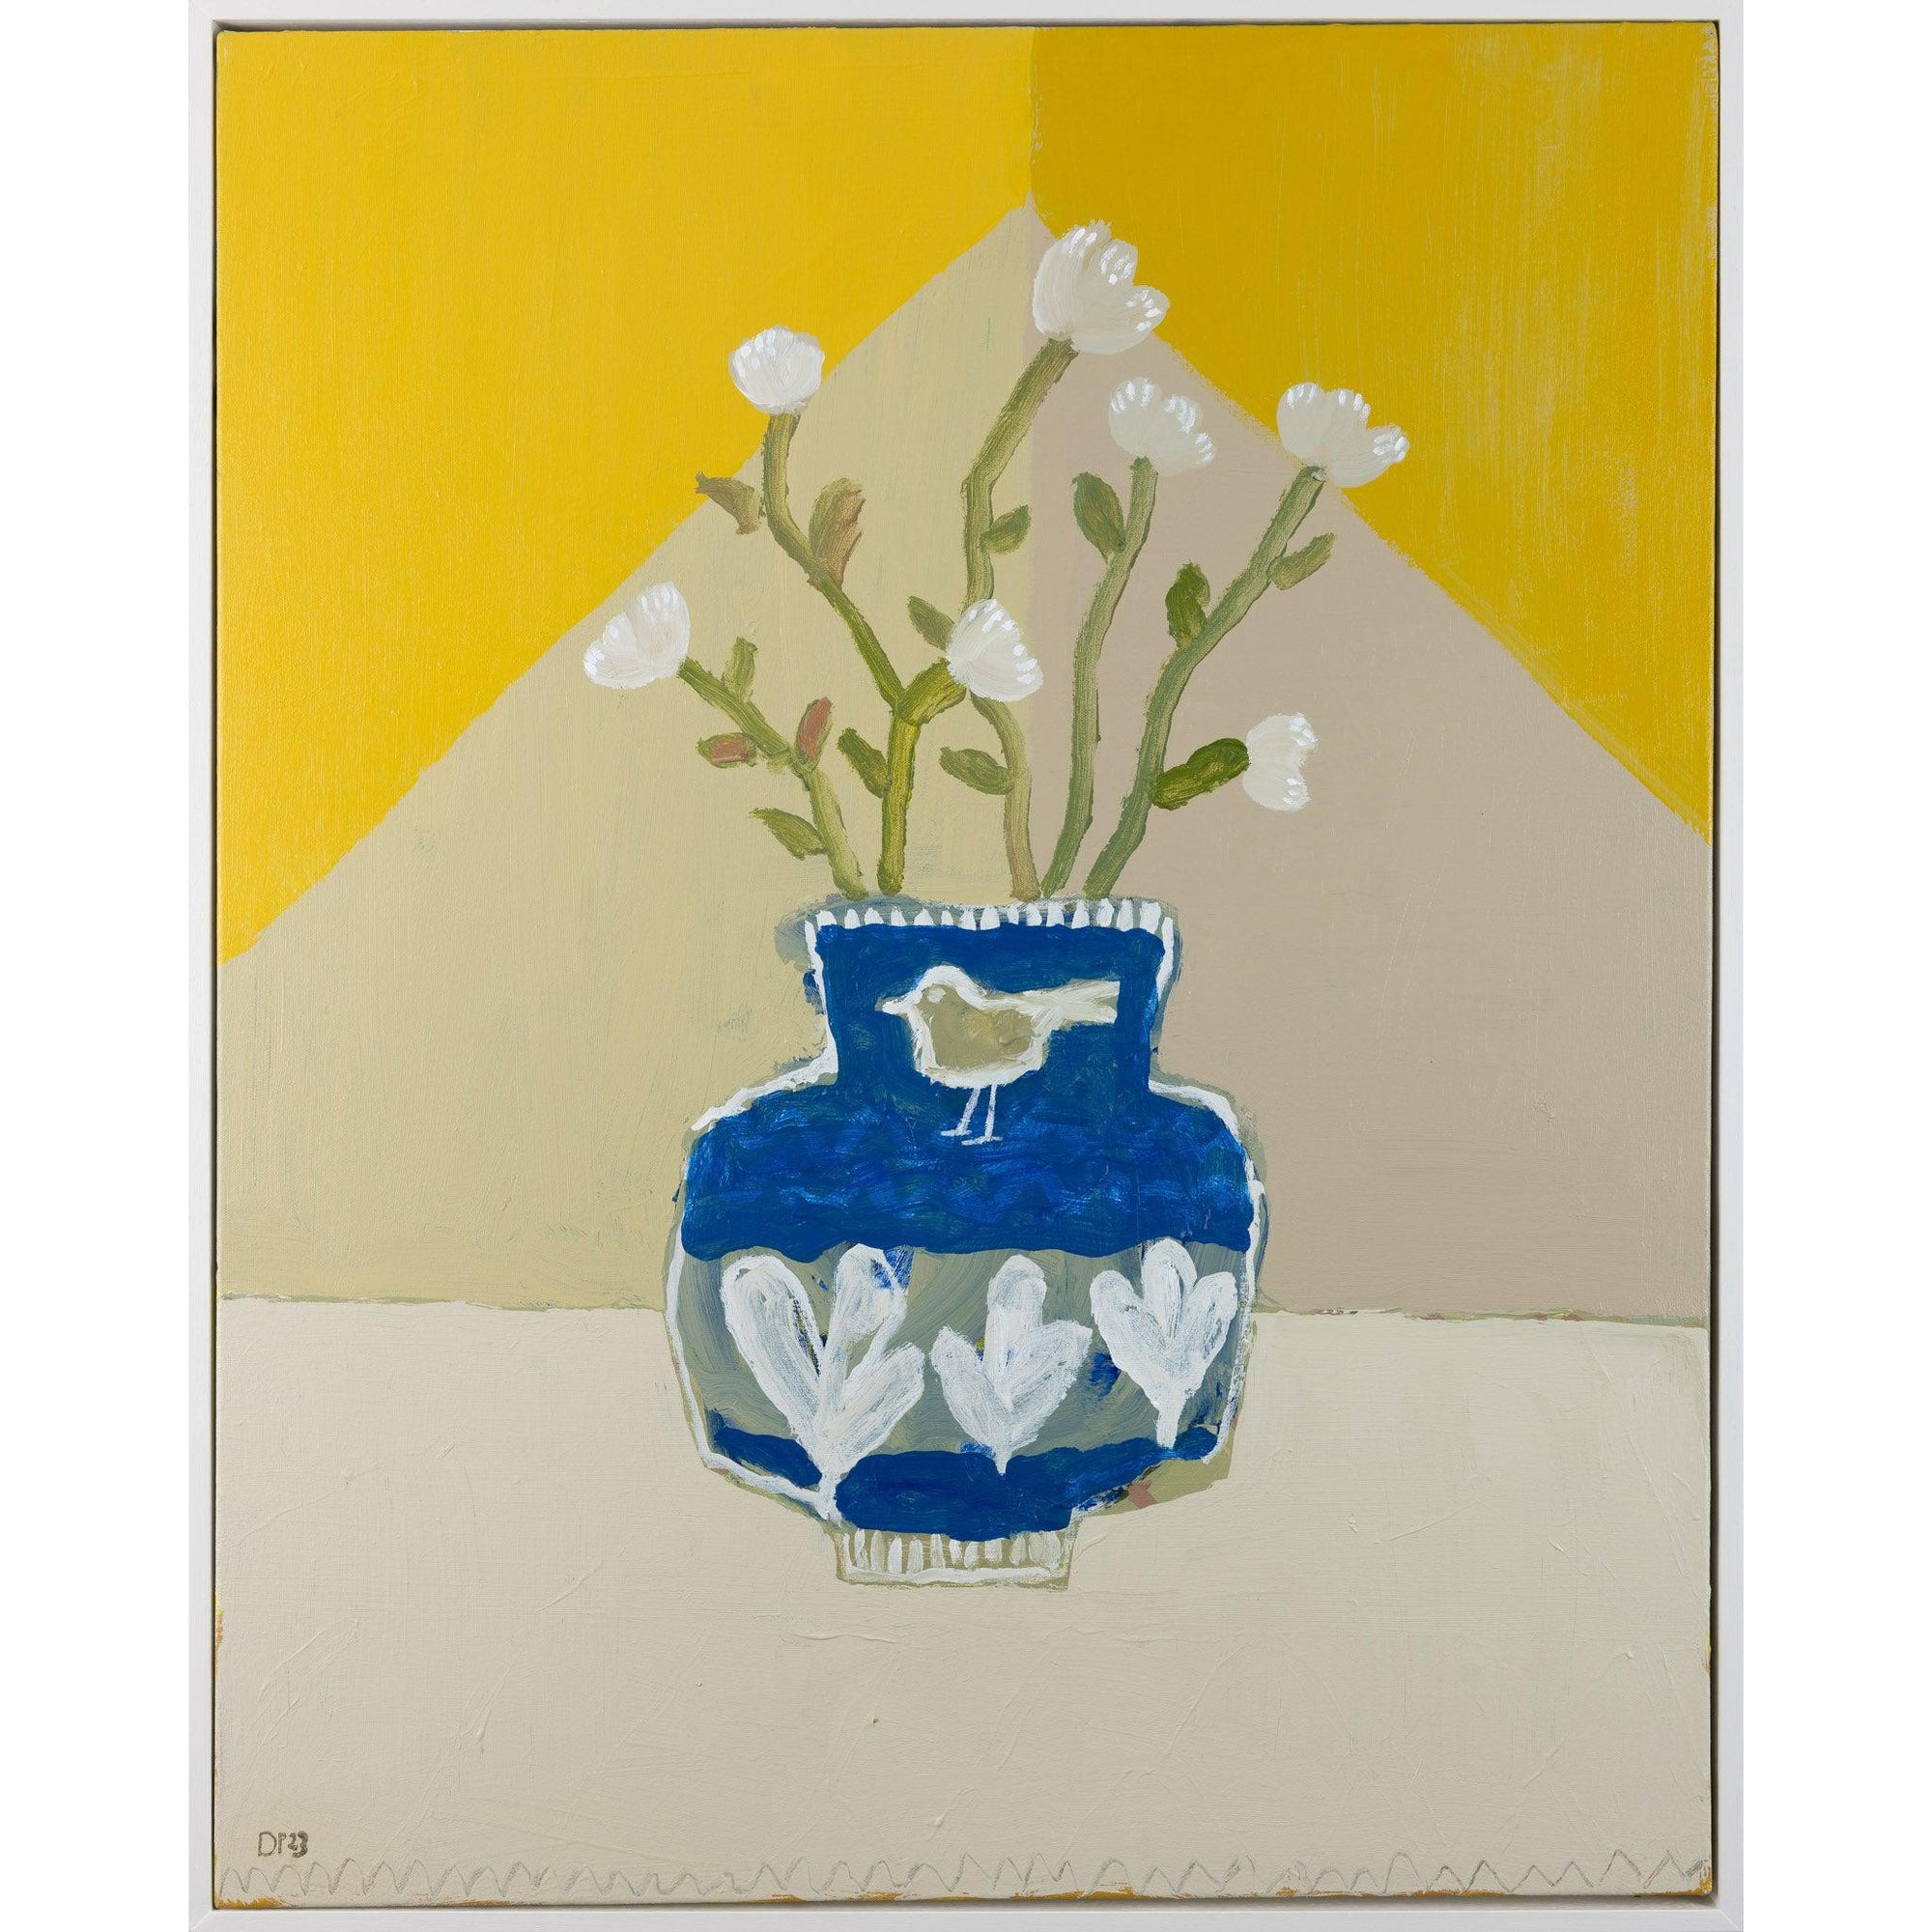 'Blue Bird Vase' acrylic on canvas by David Pearce fine art, available at Padstow Gallery, Cornwall